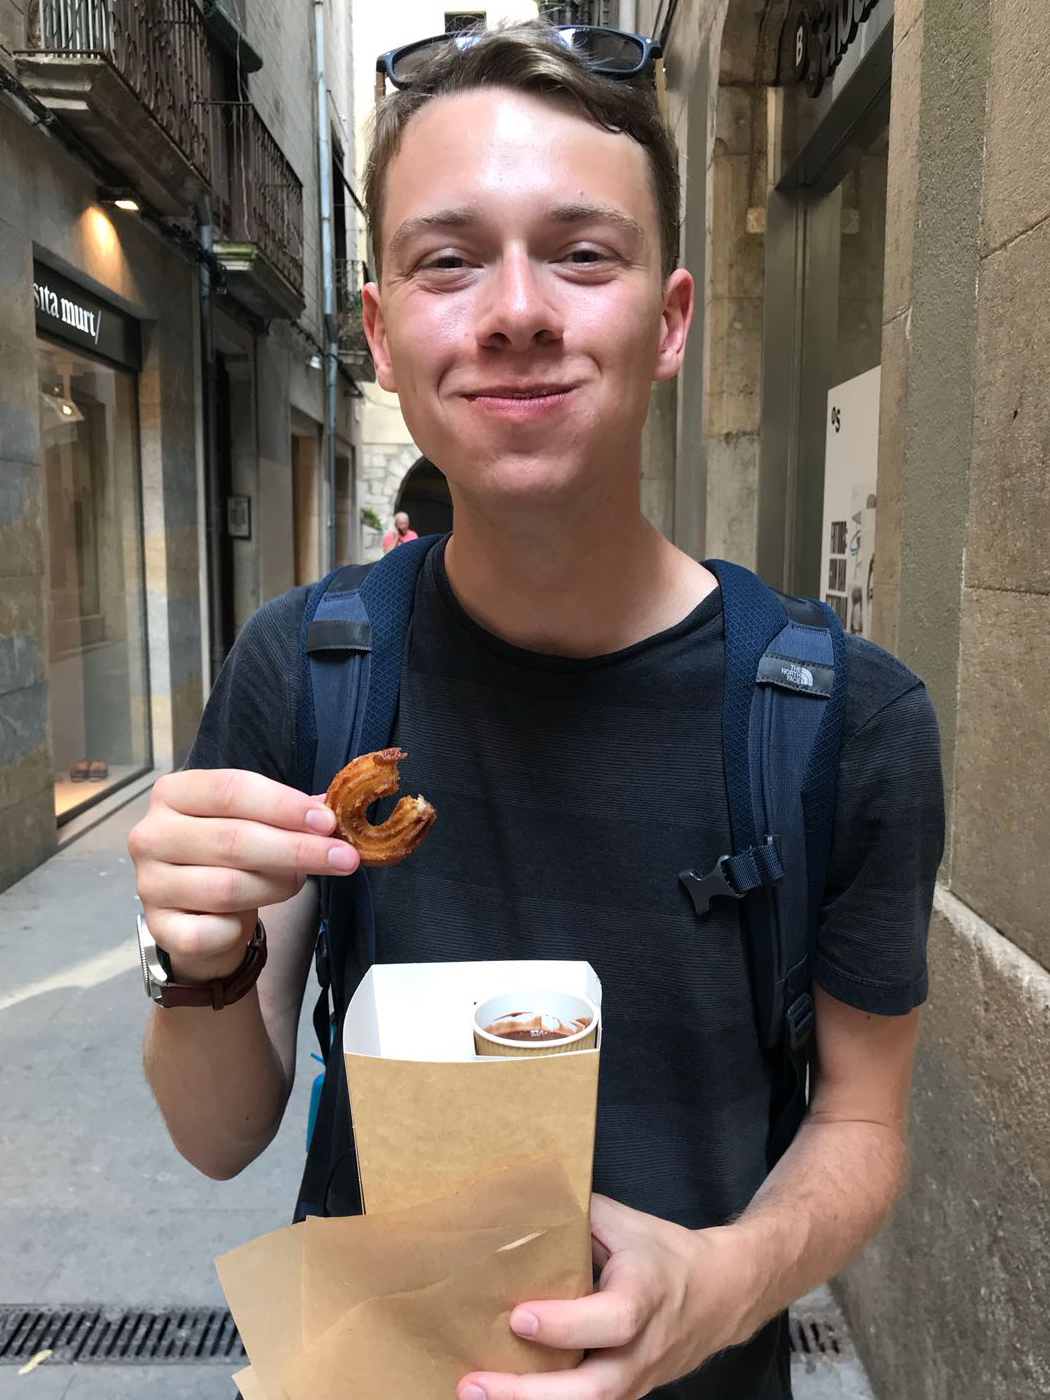 Cameron eating a snack in Barcelona